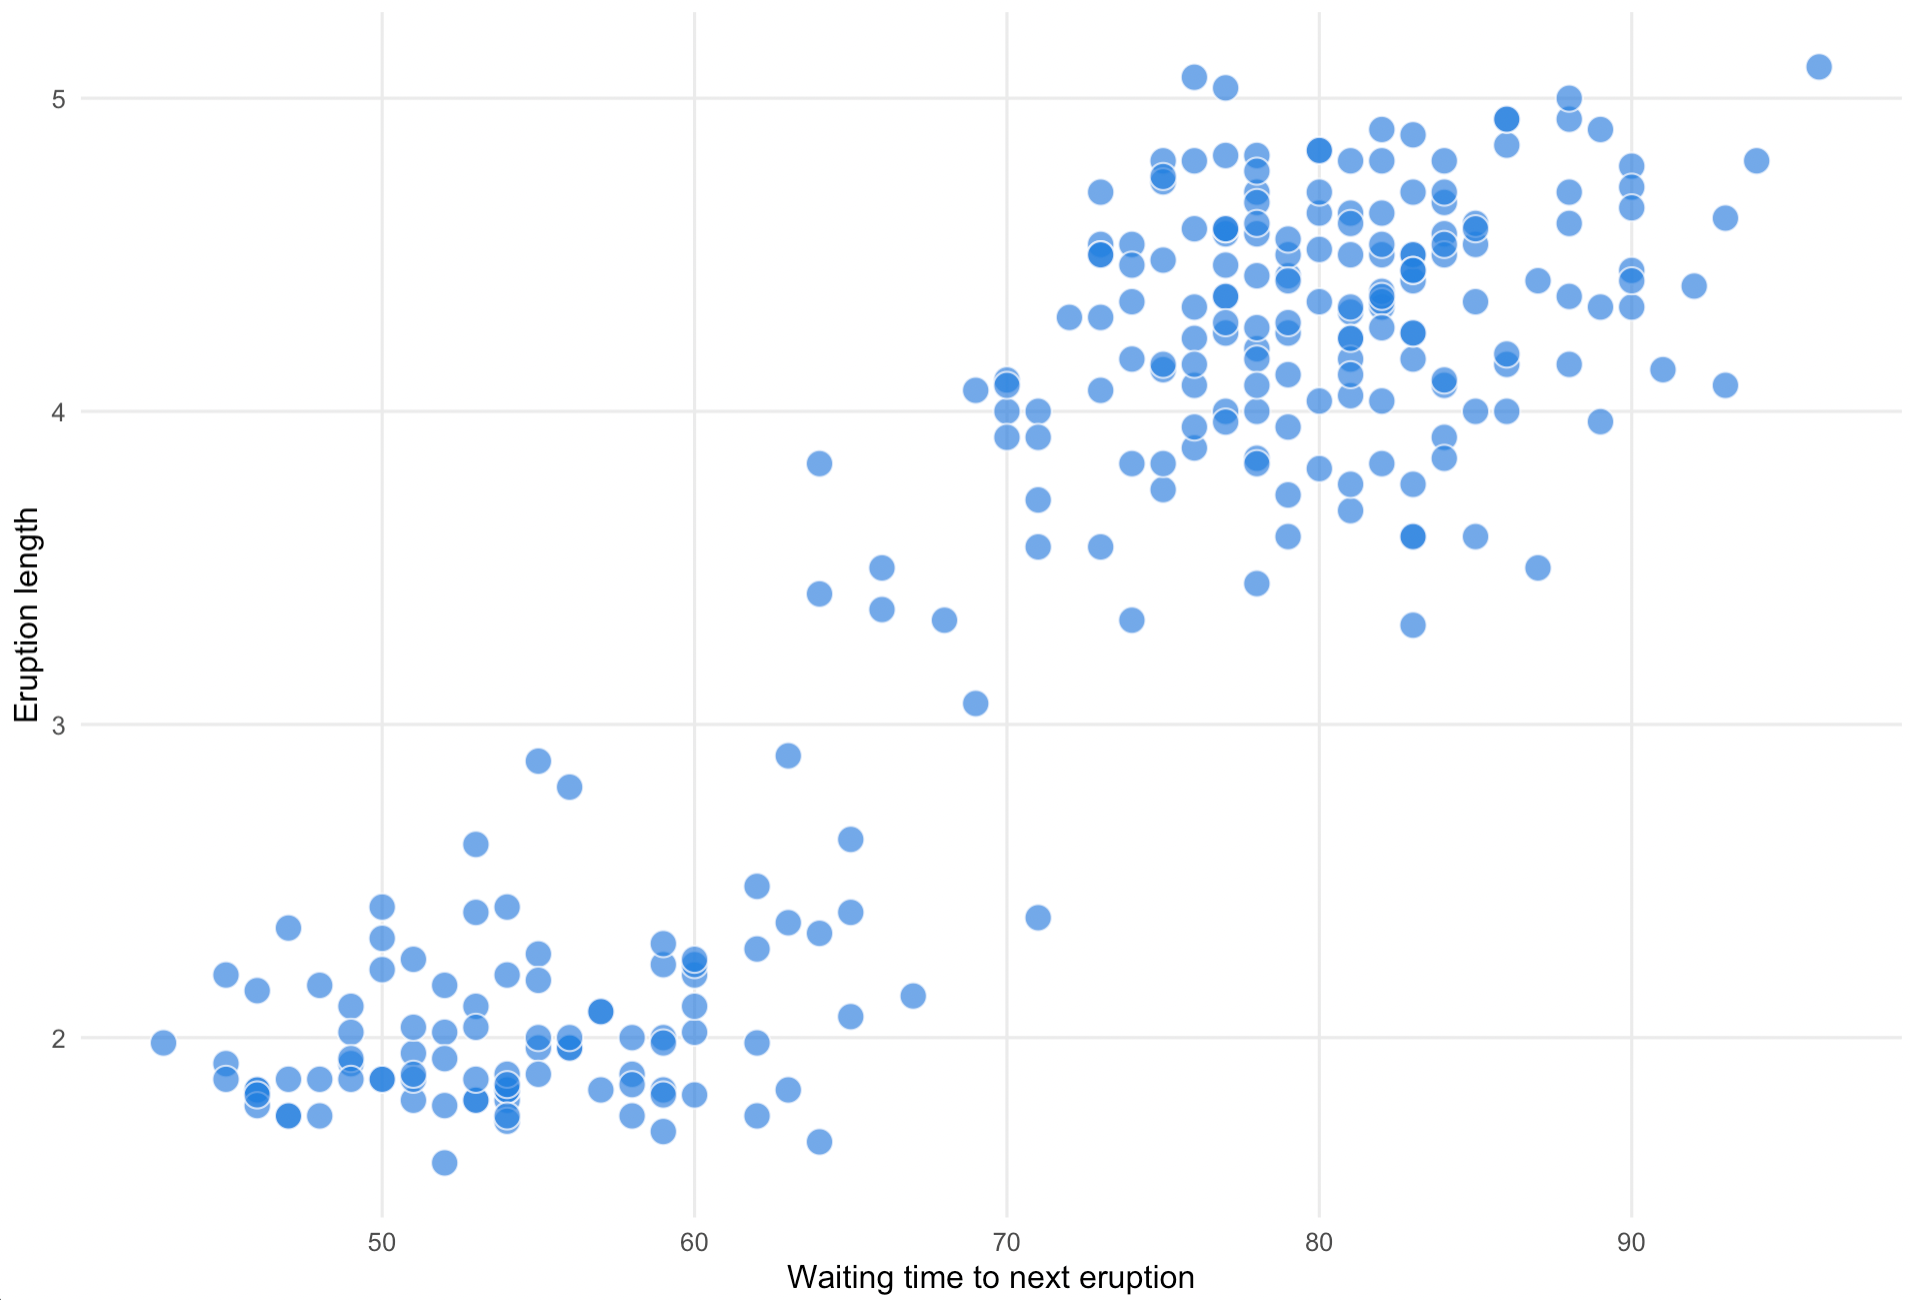 A scatter plot of the eruption length (y axis) versus waiting time to next eruption (x axis) that shows a clear correlation between both variables